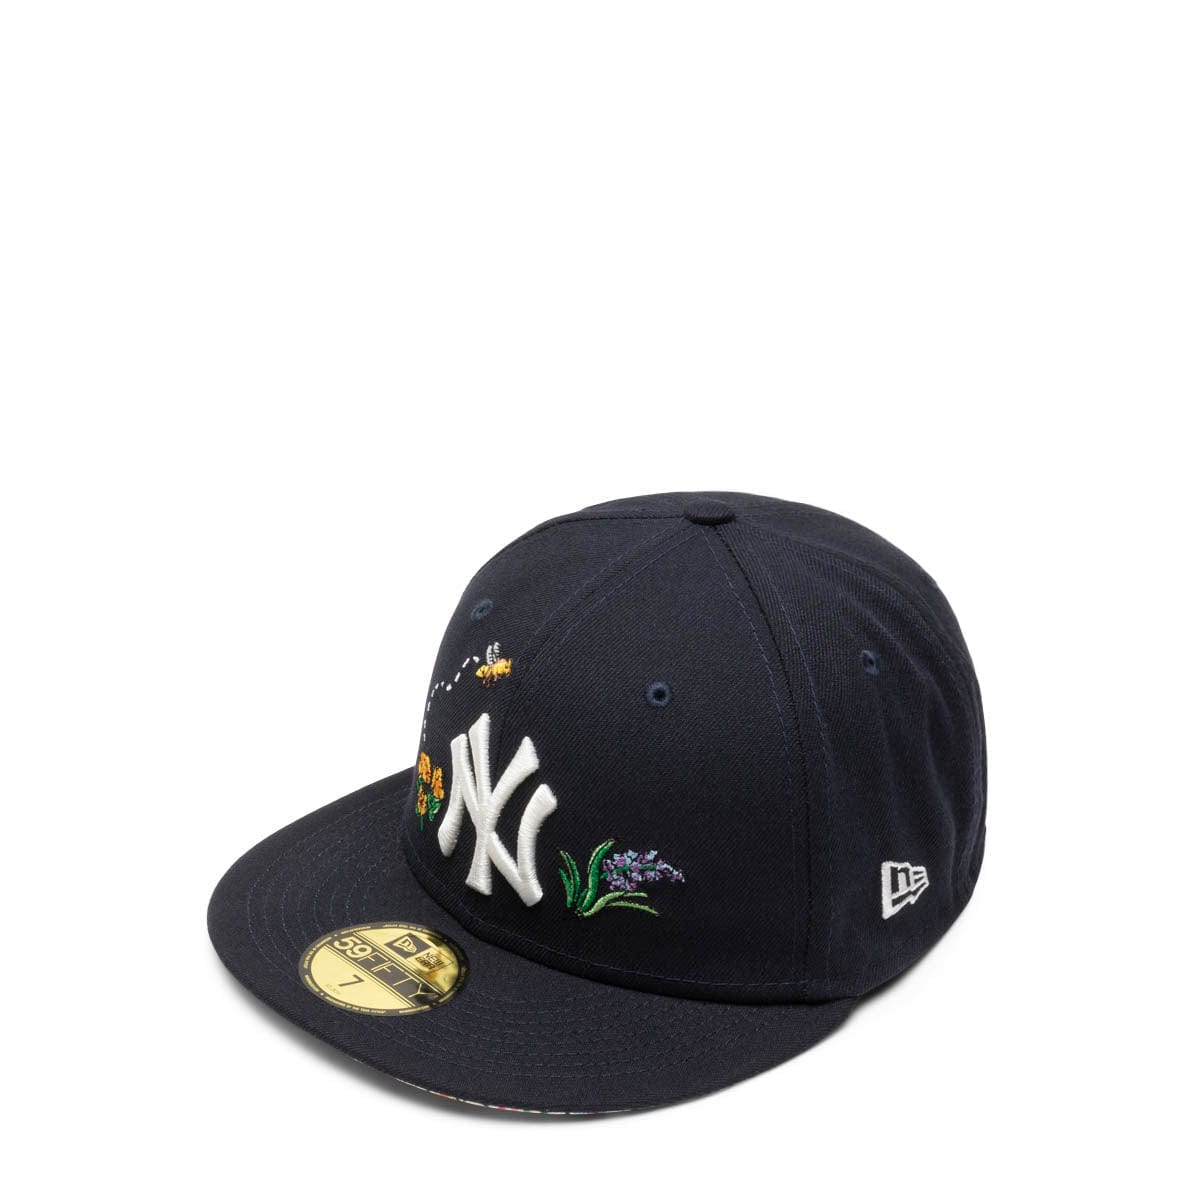 59FIFTY NEW YORK YANKEES TEAM HEART FITTED CAP NAVY